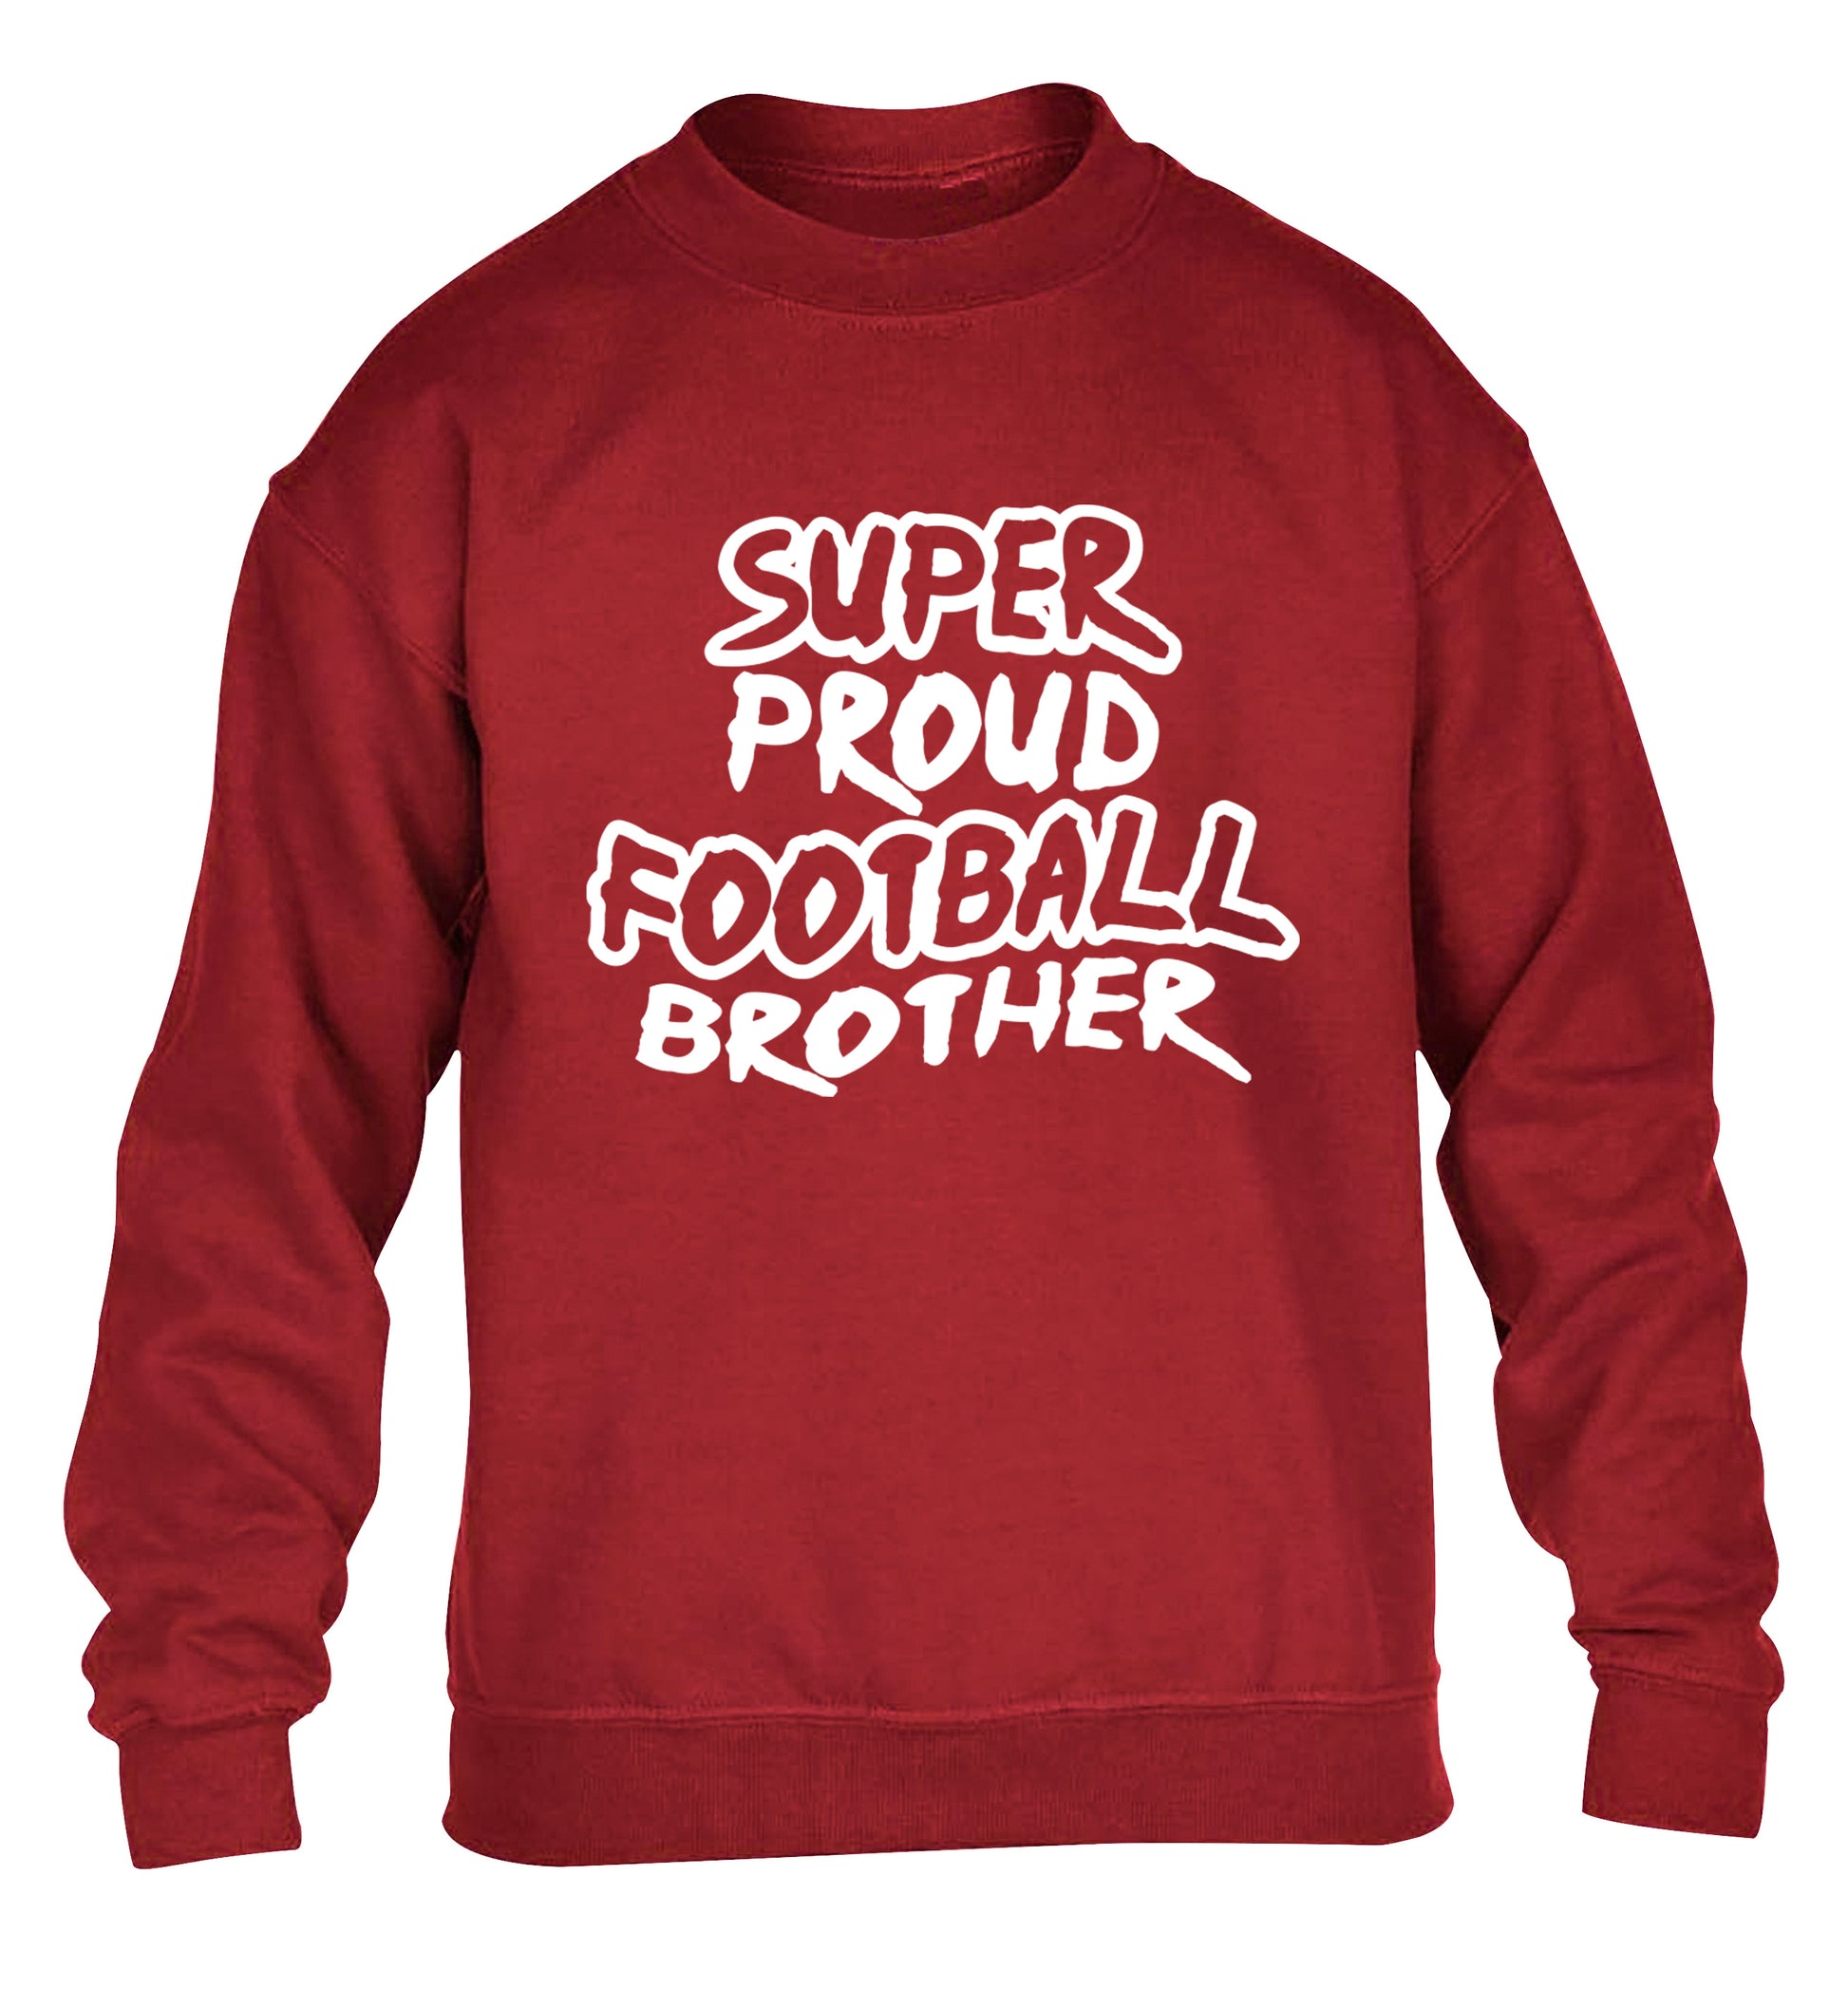 Super proud football brother children's grey sweater 12-14 Years